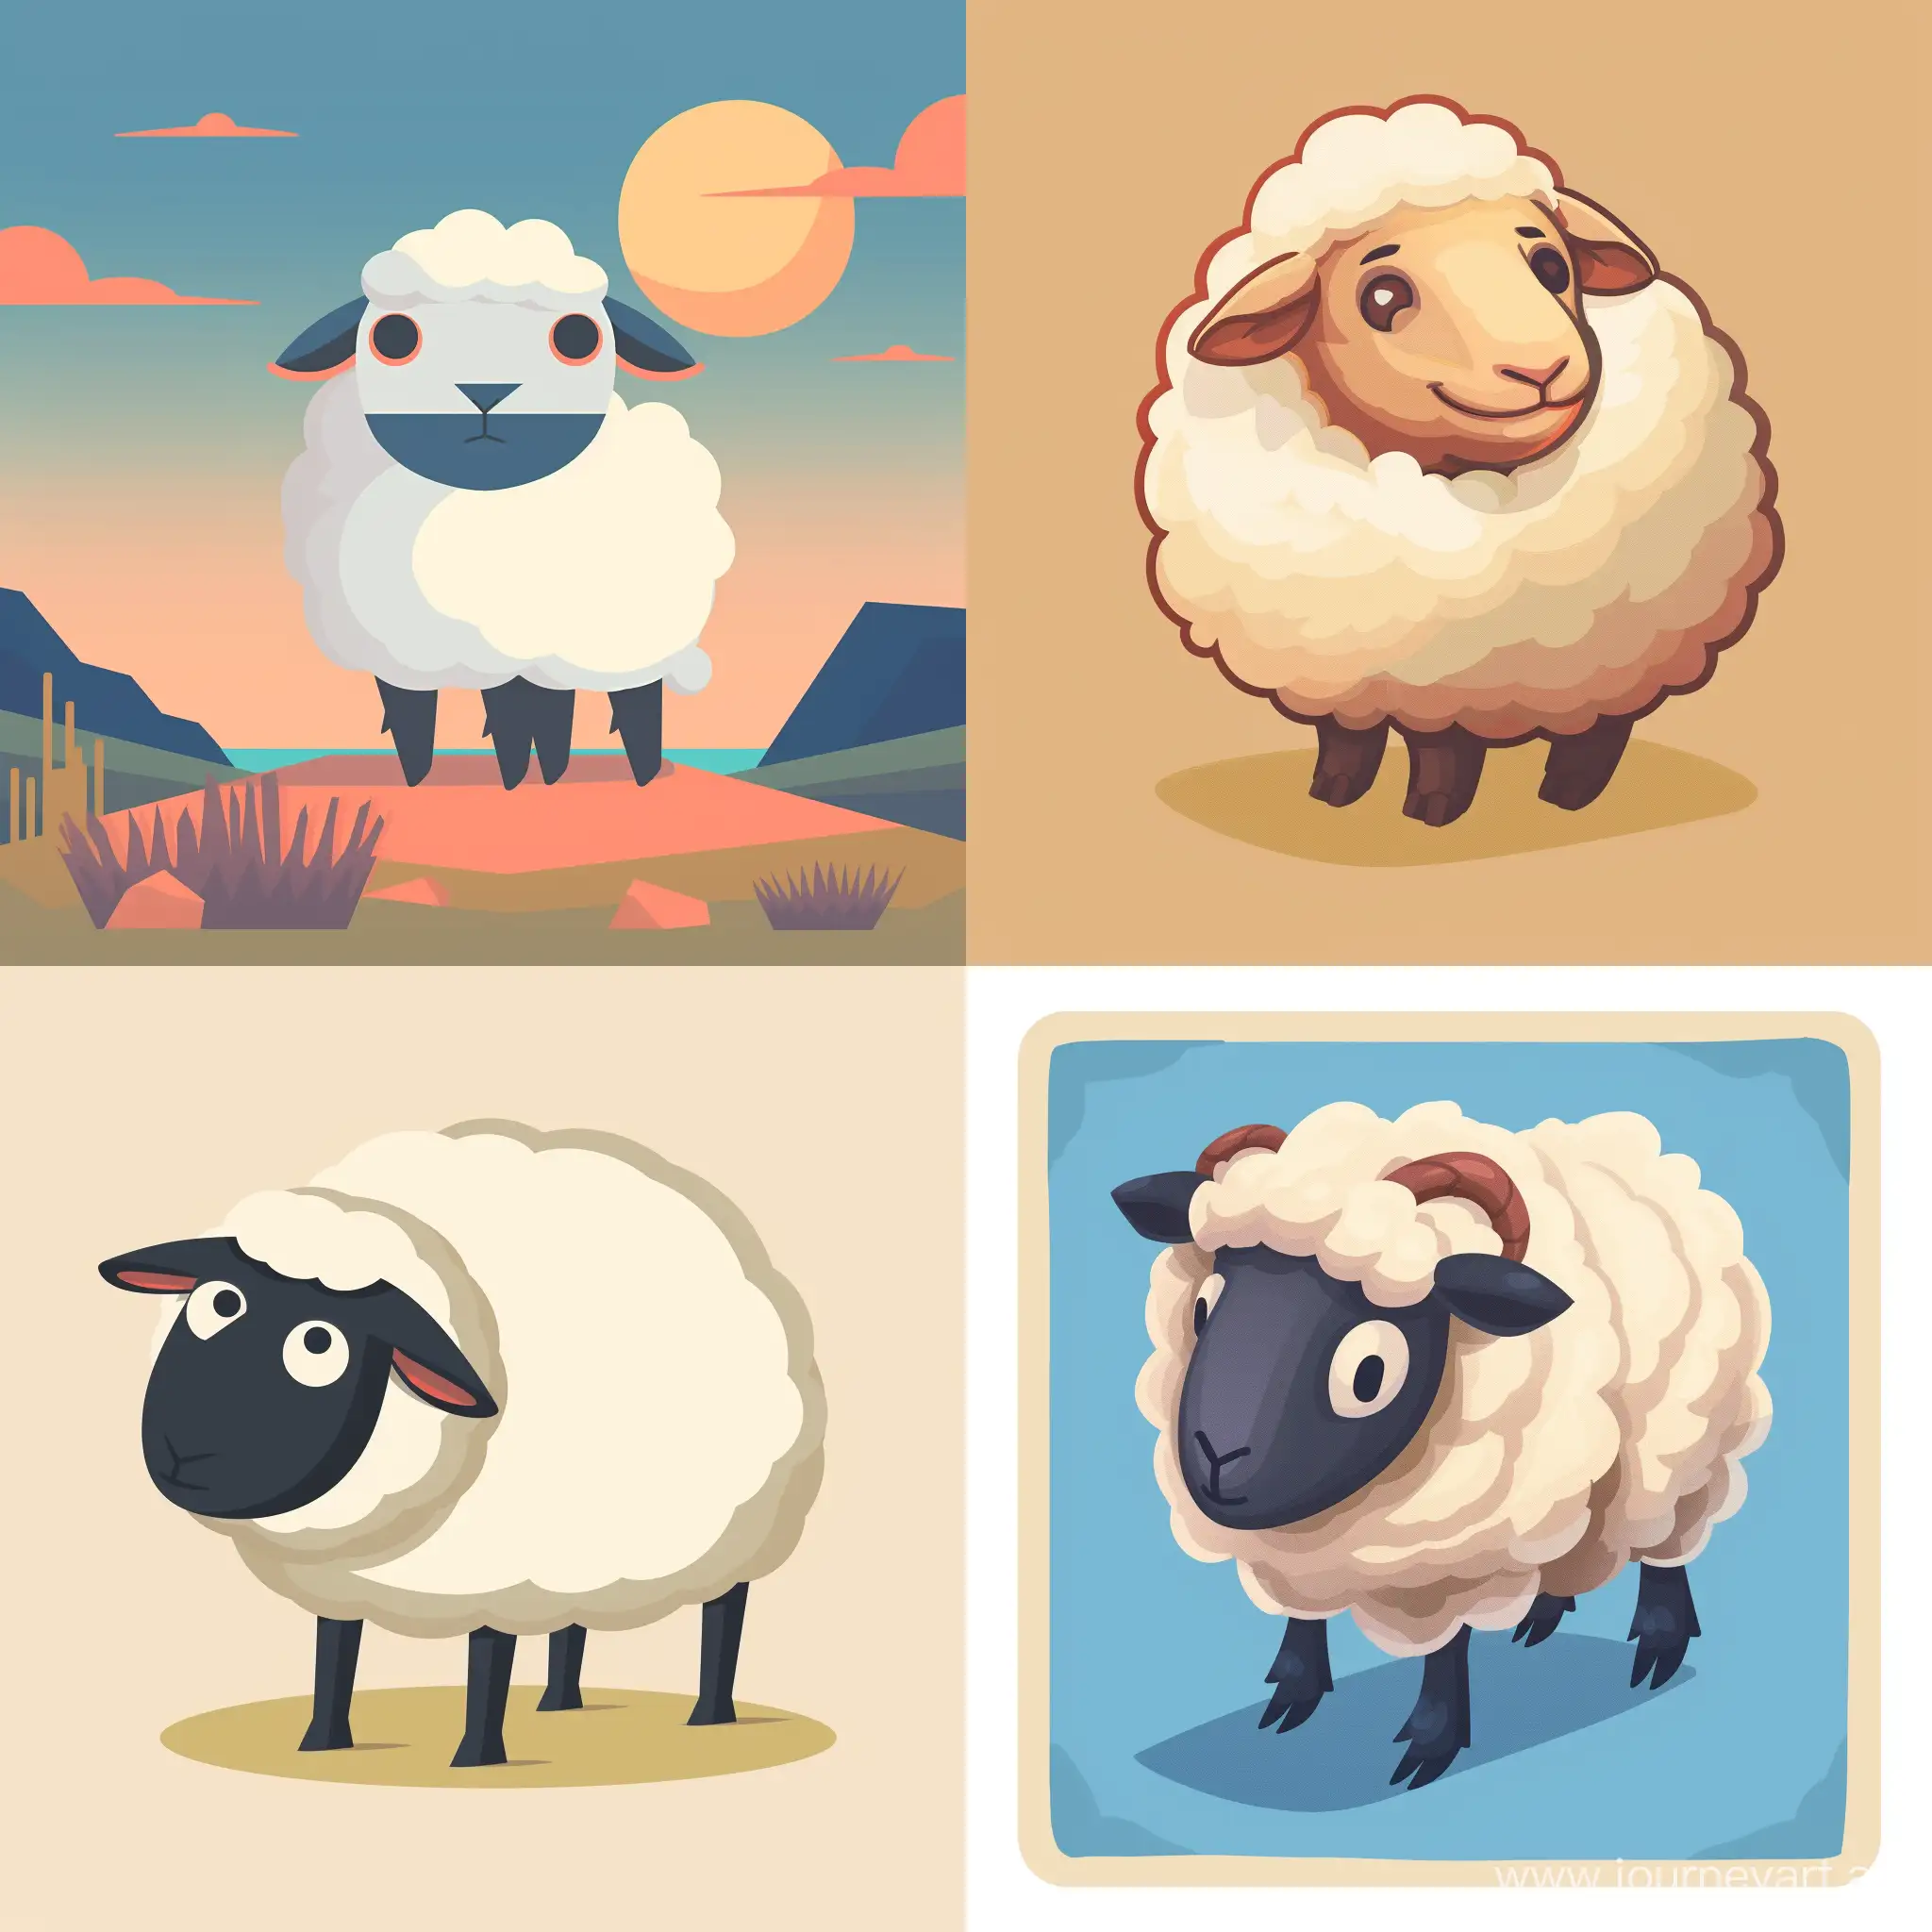 Minimalistic-Sheep-Card-for-Game-Design